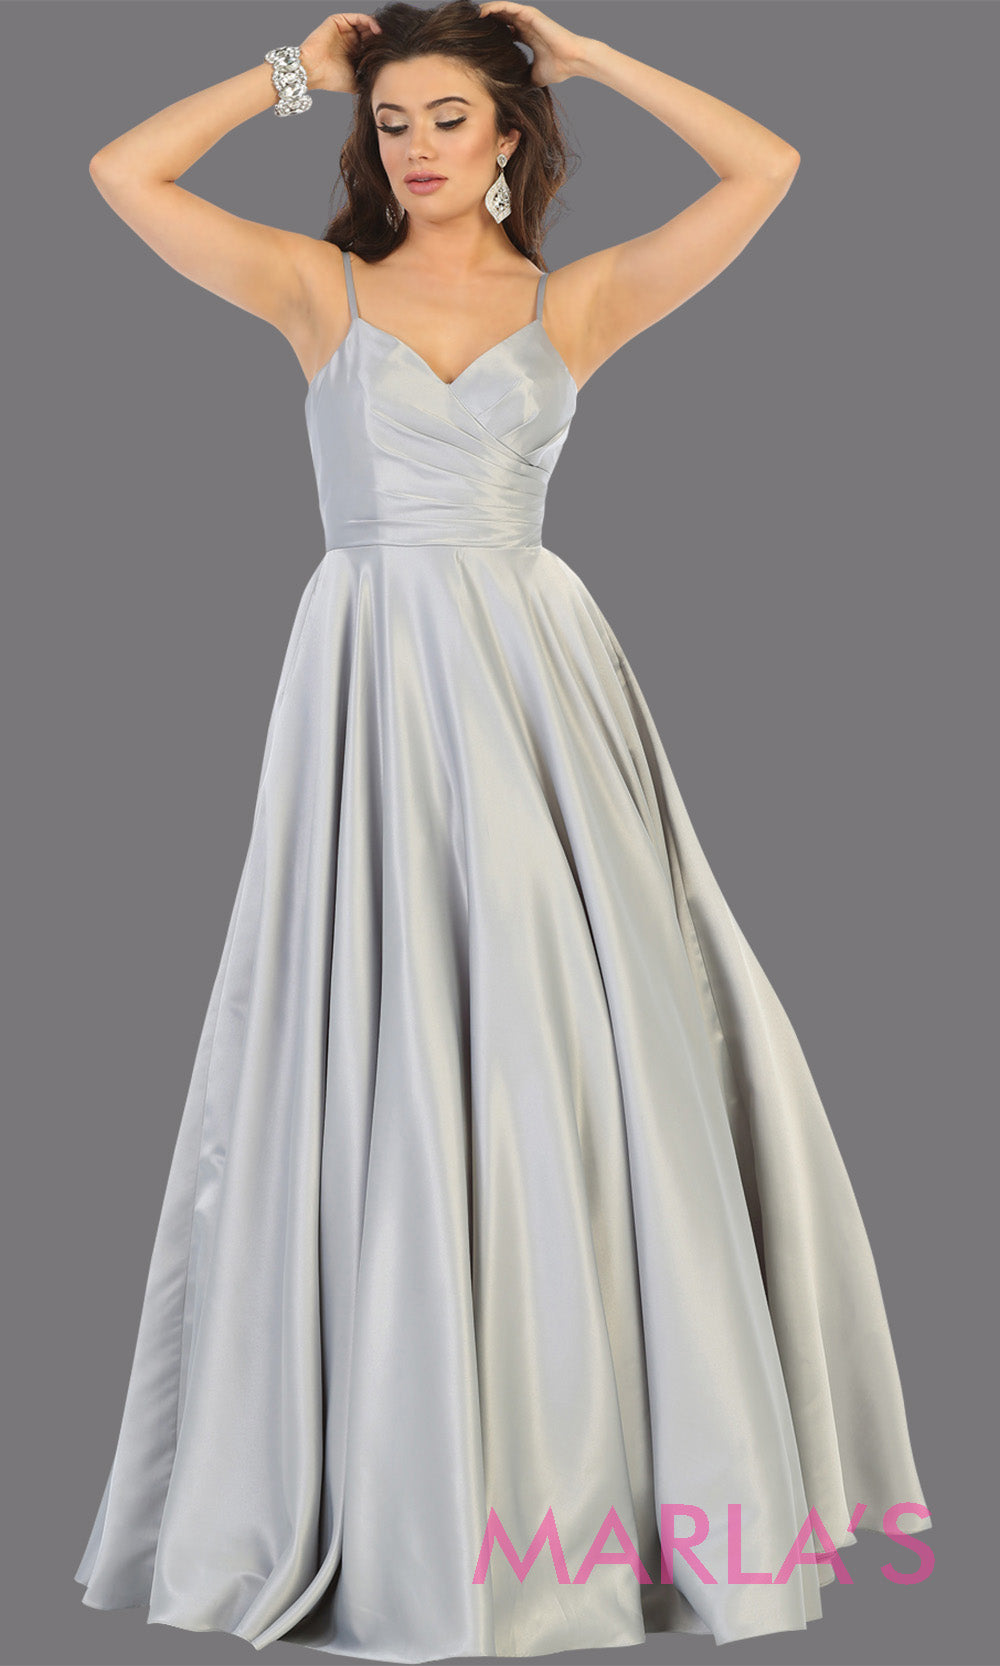 Long simple v neck silver satin semi ballgown with pockets. This light grey flowy gown from mayqueen is perfect for prom, black tie event, engagement dress, formal party dress, plus size wedding guest dresses, gray indowestern party dress